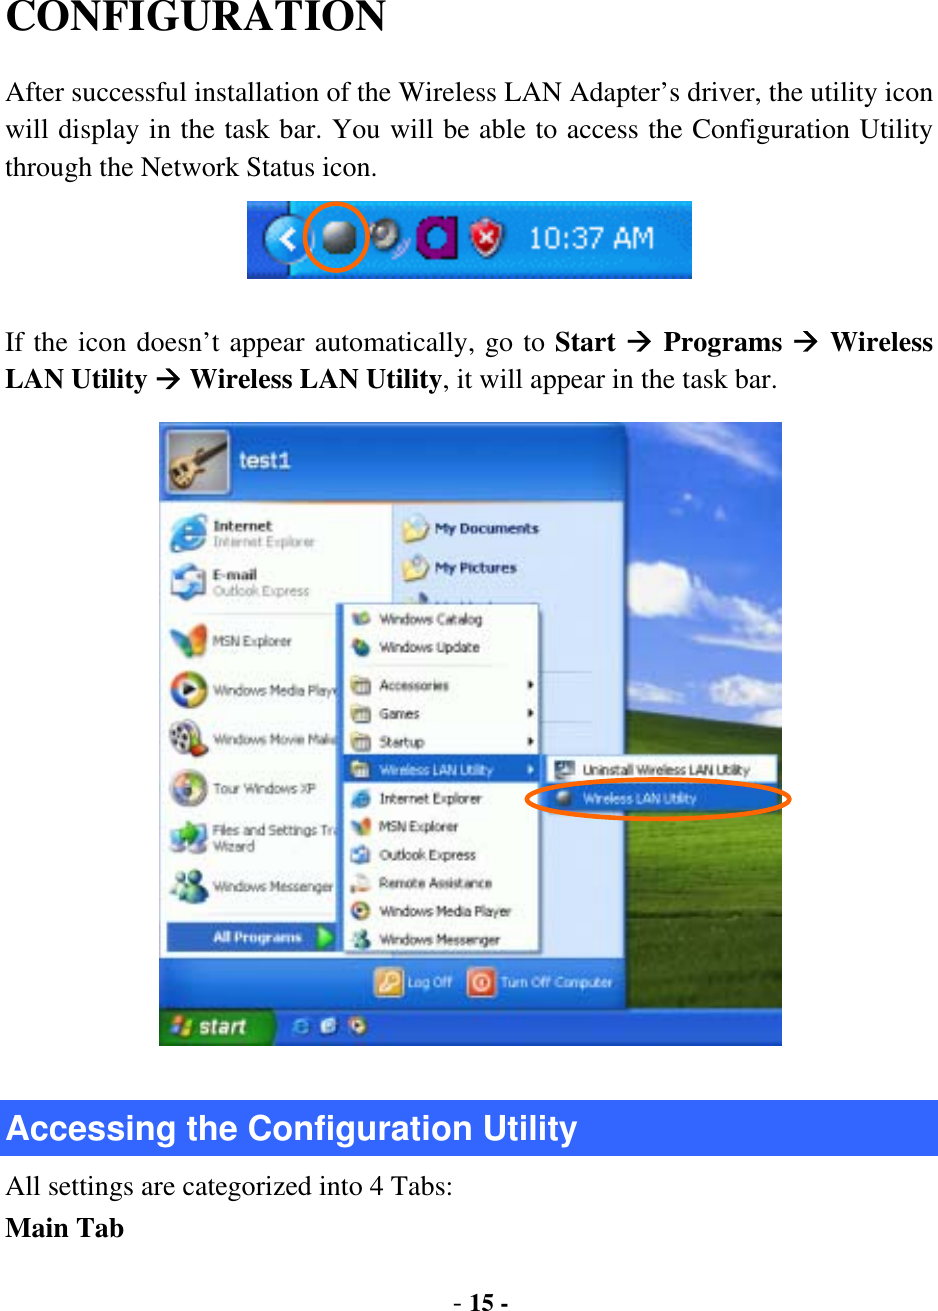  - 15 - CONFIGURATION After successful installation of the Wireless LAN Adapter’s driver, the utility icon will display in the task bar. You will be able to access the Configuration Utility through the Network Status icon.  If the icon doesn’t appear automatically, go to Start  Programs  Wireless LAN Utility  Wireless LAN Utility, it will appear in the task bar.    Accessing the Configuration Utility All settings are categorized into 4 Tabs: Main Tab 